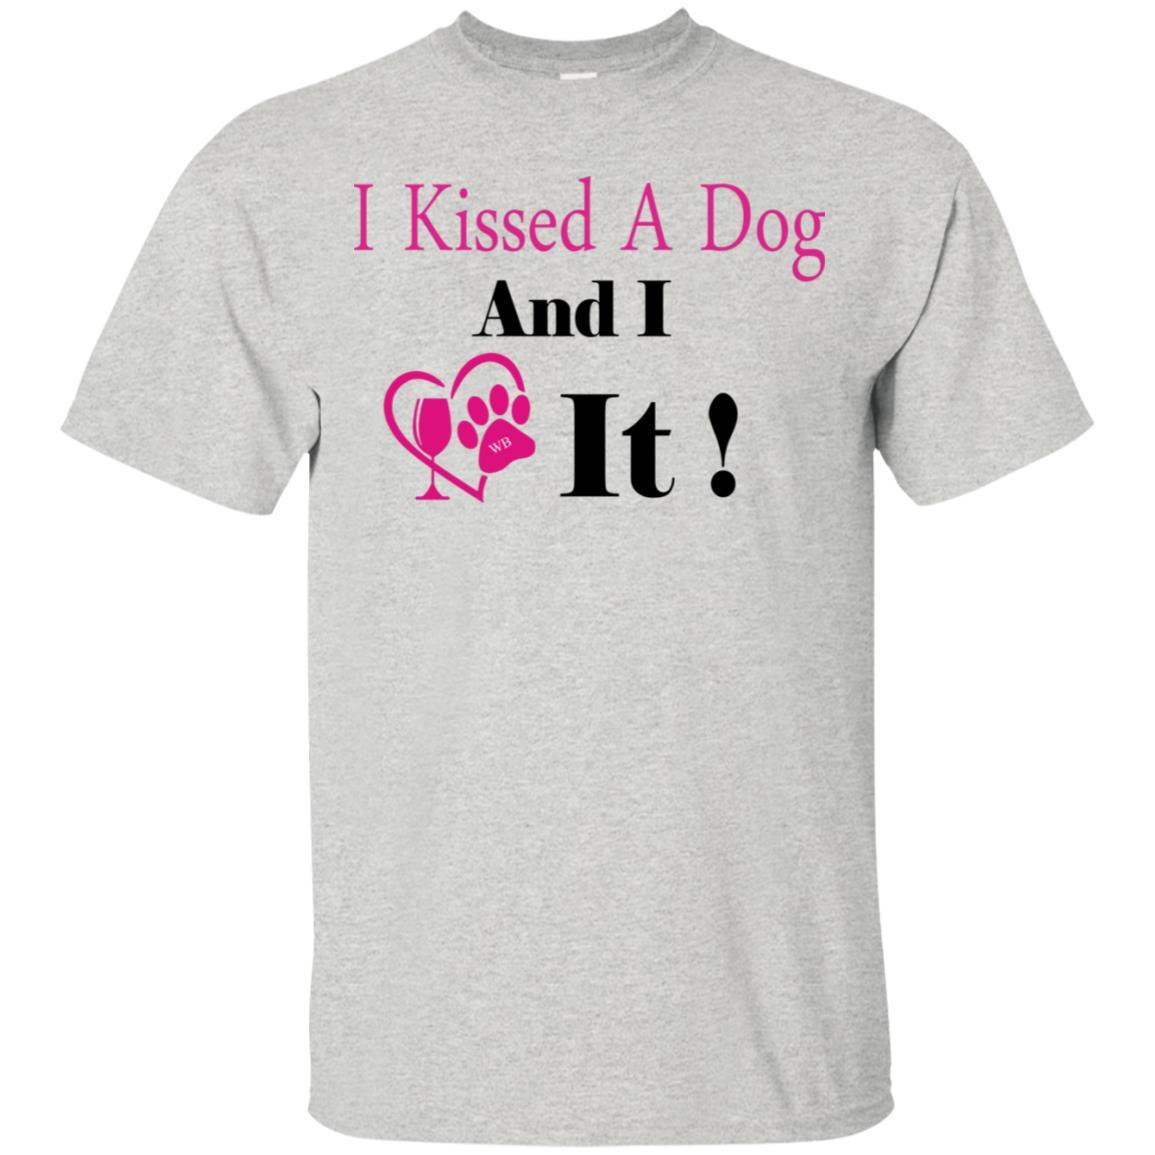 T-Shirts Ash / S WineyBitches.co "I Kissed A Dog And I Loved It:" Ultra Cotton T-Shirt WineyBitchesCo